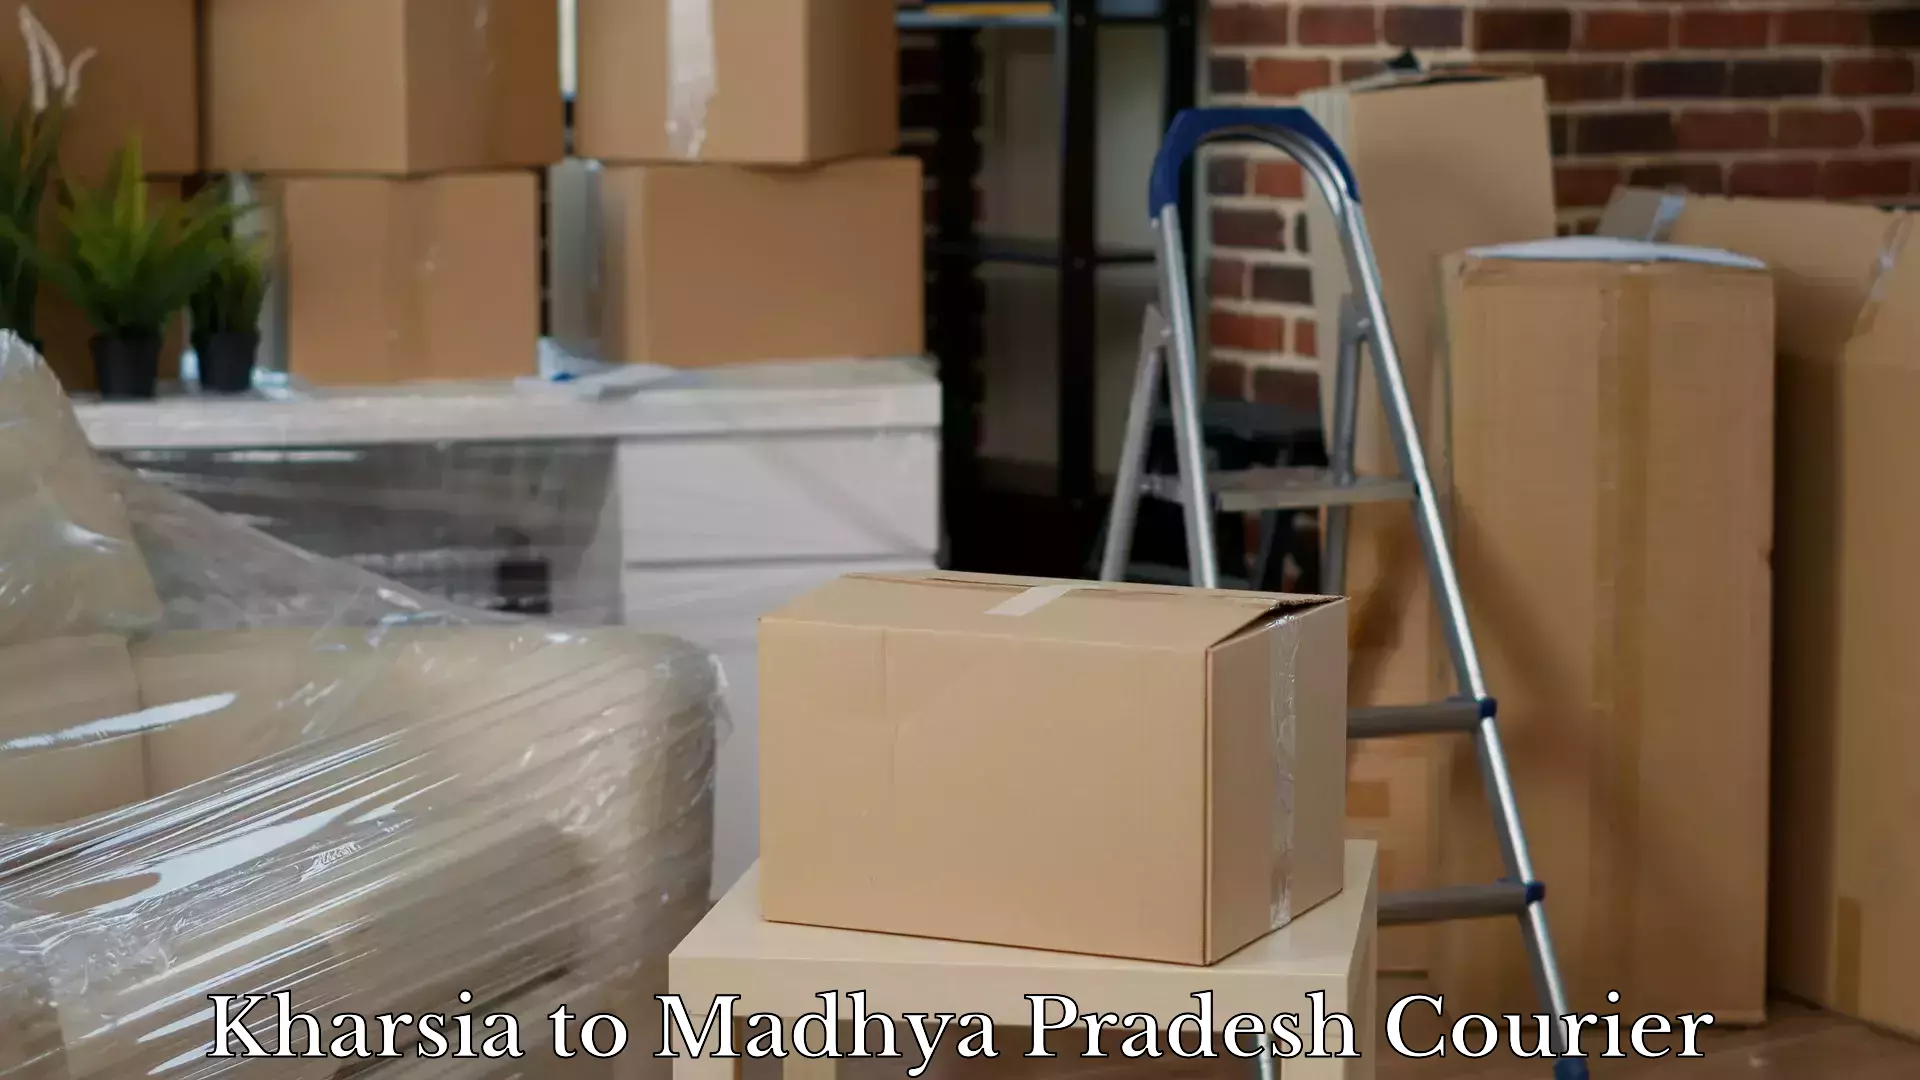 Baggage relocation service in Kharsia to Raipur Karchuliyan